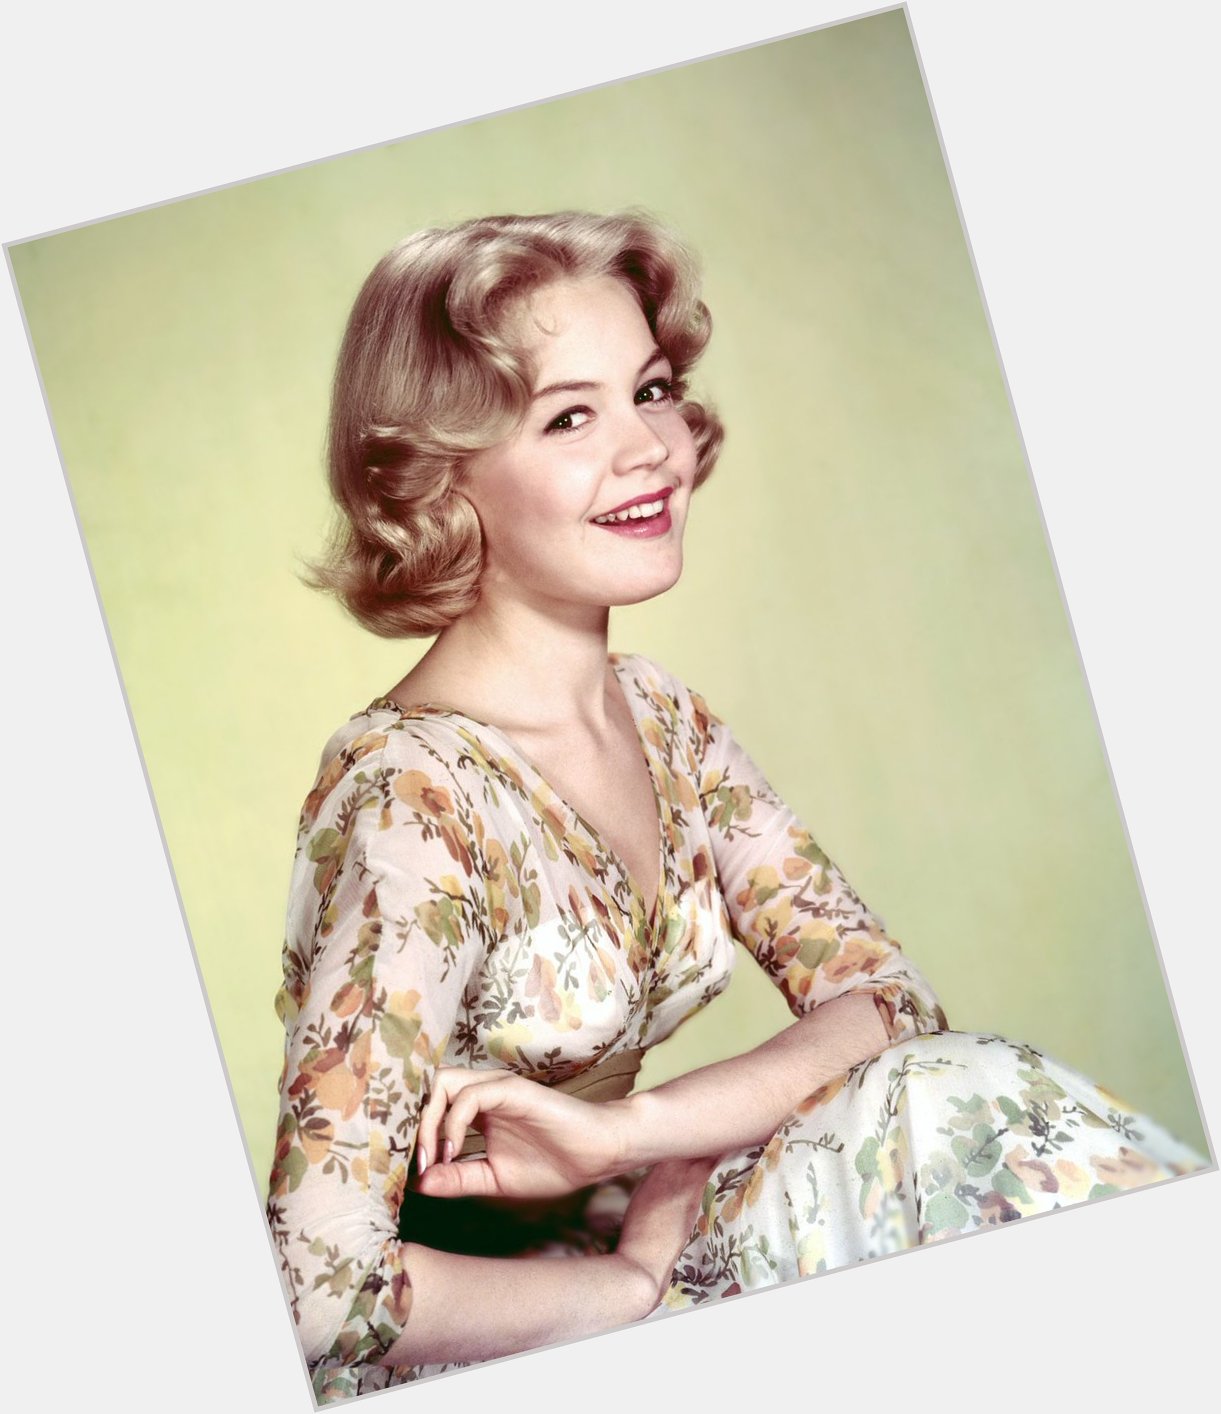 Happy Birthday to the lovely and talented Sandra Dee, who would have been 76 today! (1942-2005) 